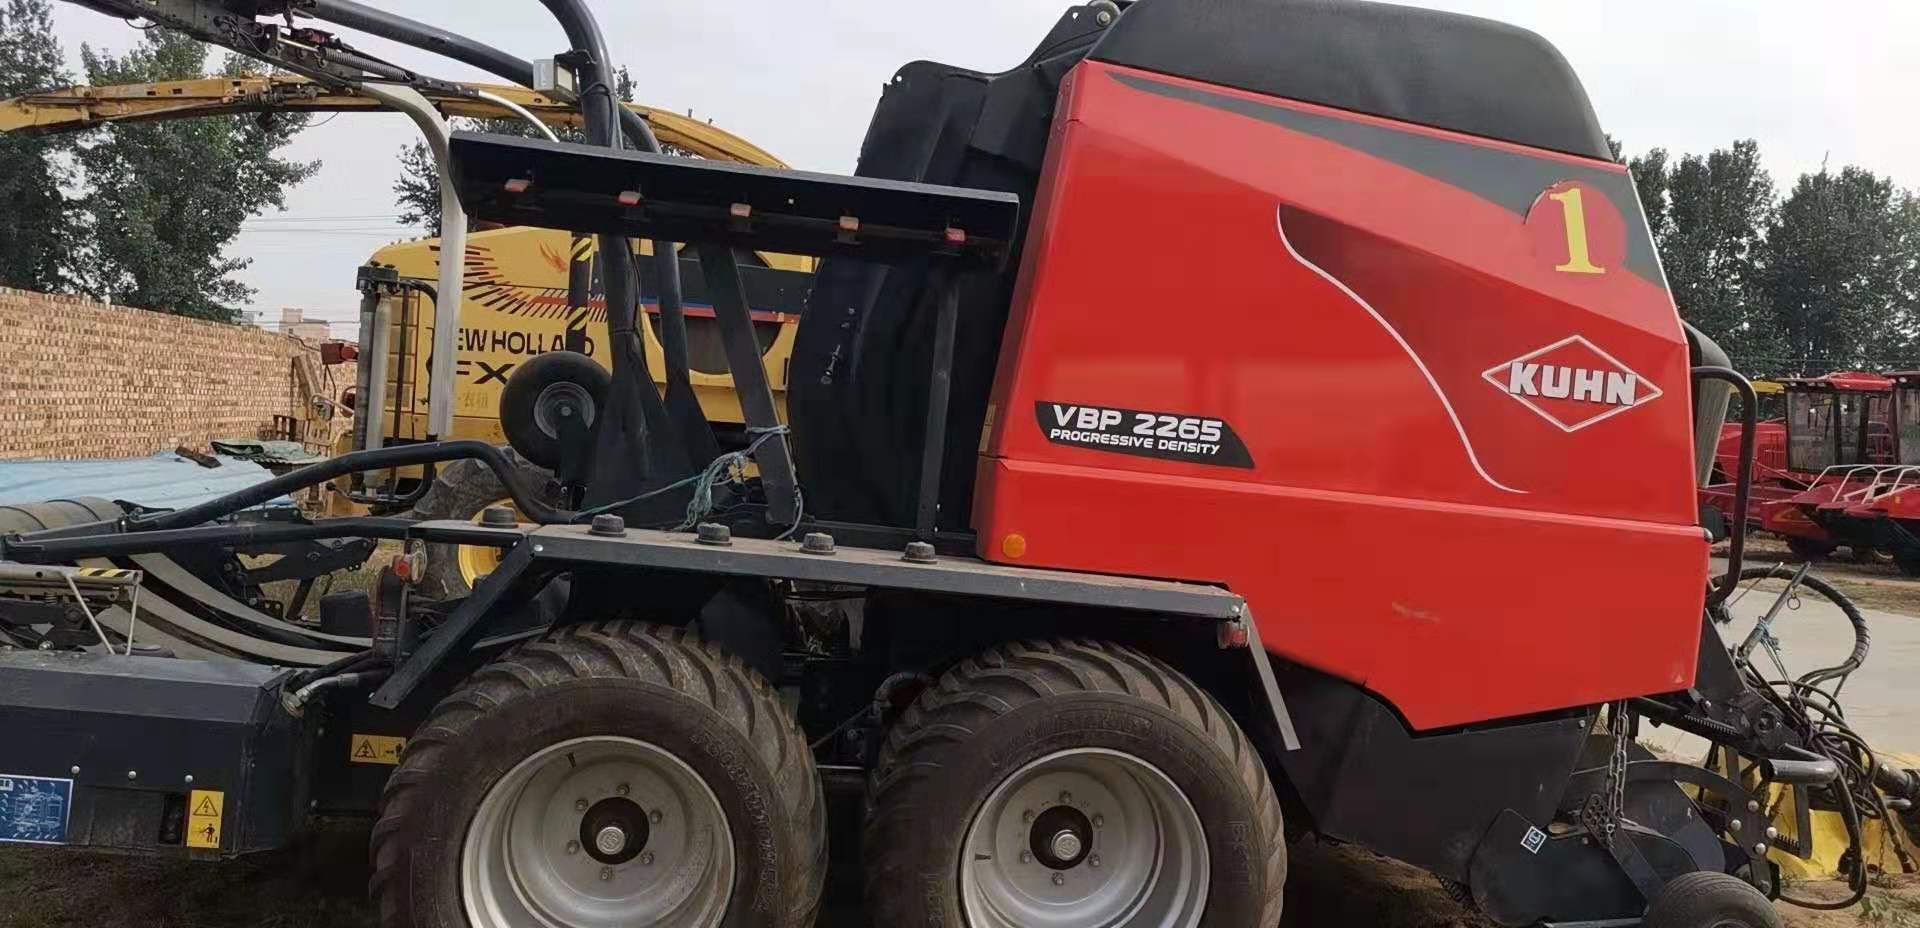 2018 Year Kuhn VBP 2265 Baler and Wrapping, Made in Netherland, only around 900 baler number(图8)